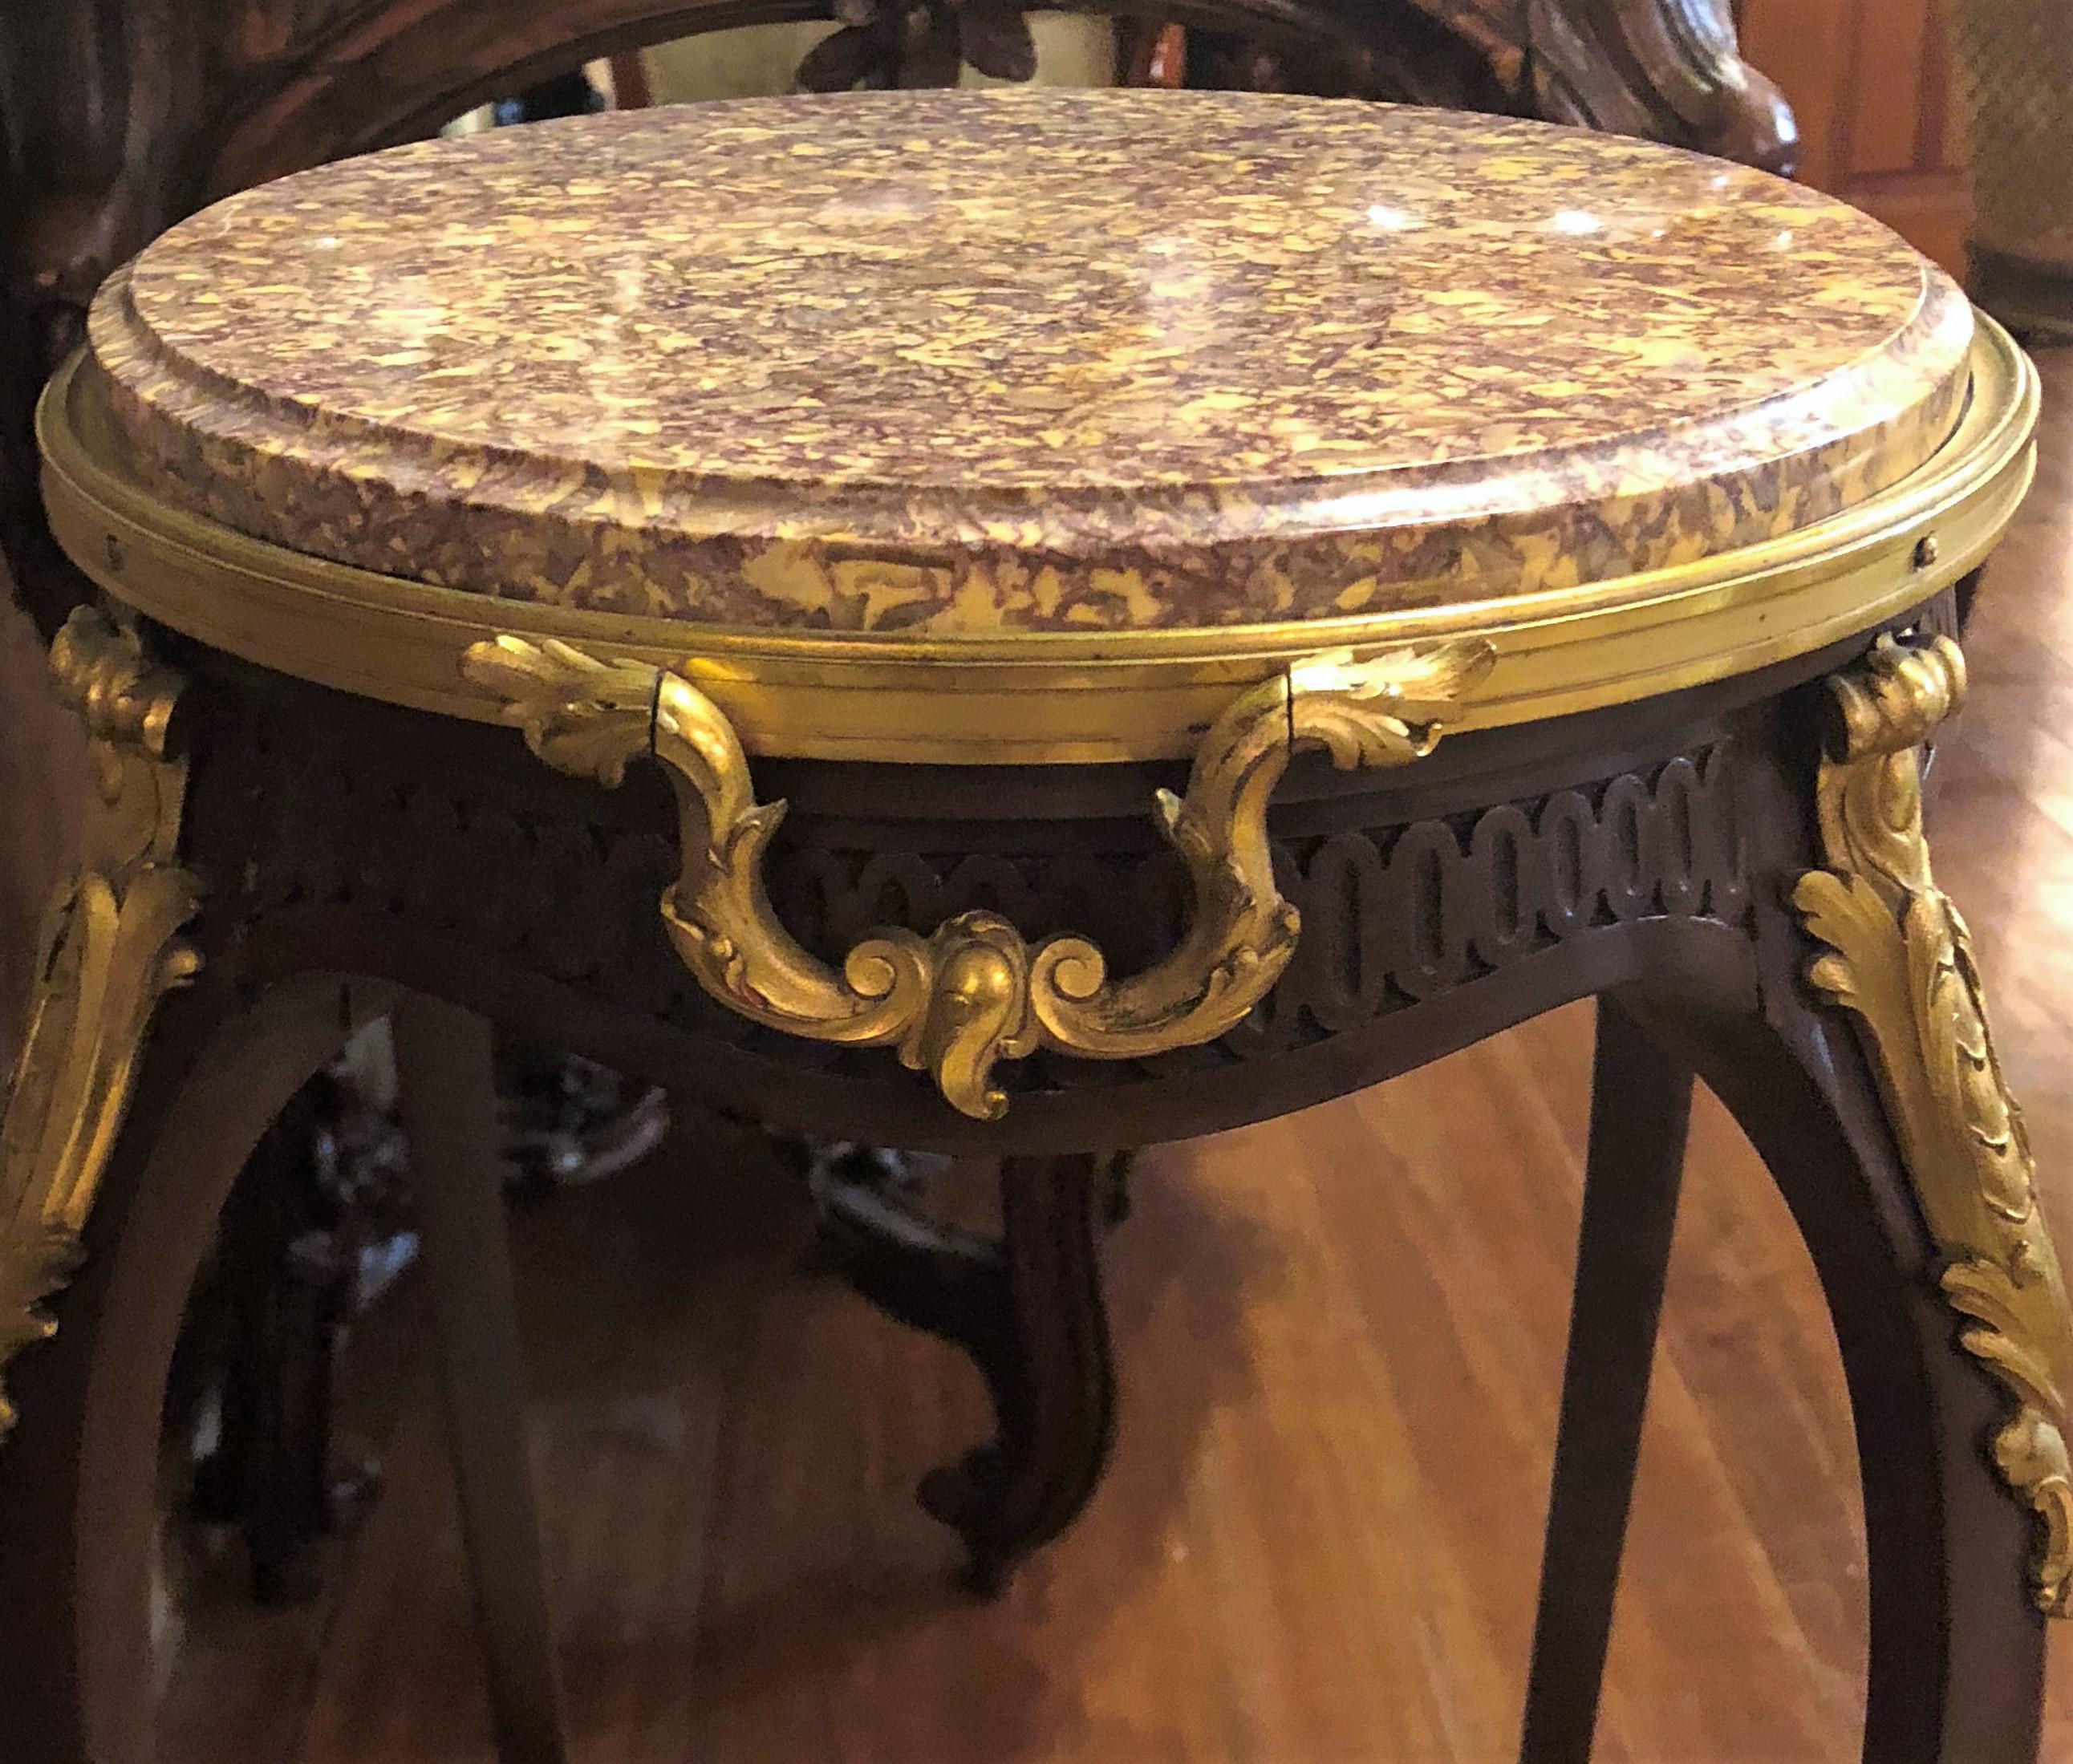 This table has a lovely oval shape and is very appealing in form and construction. It is a typically beautiful little French table.